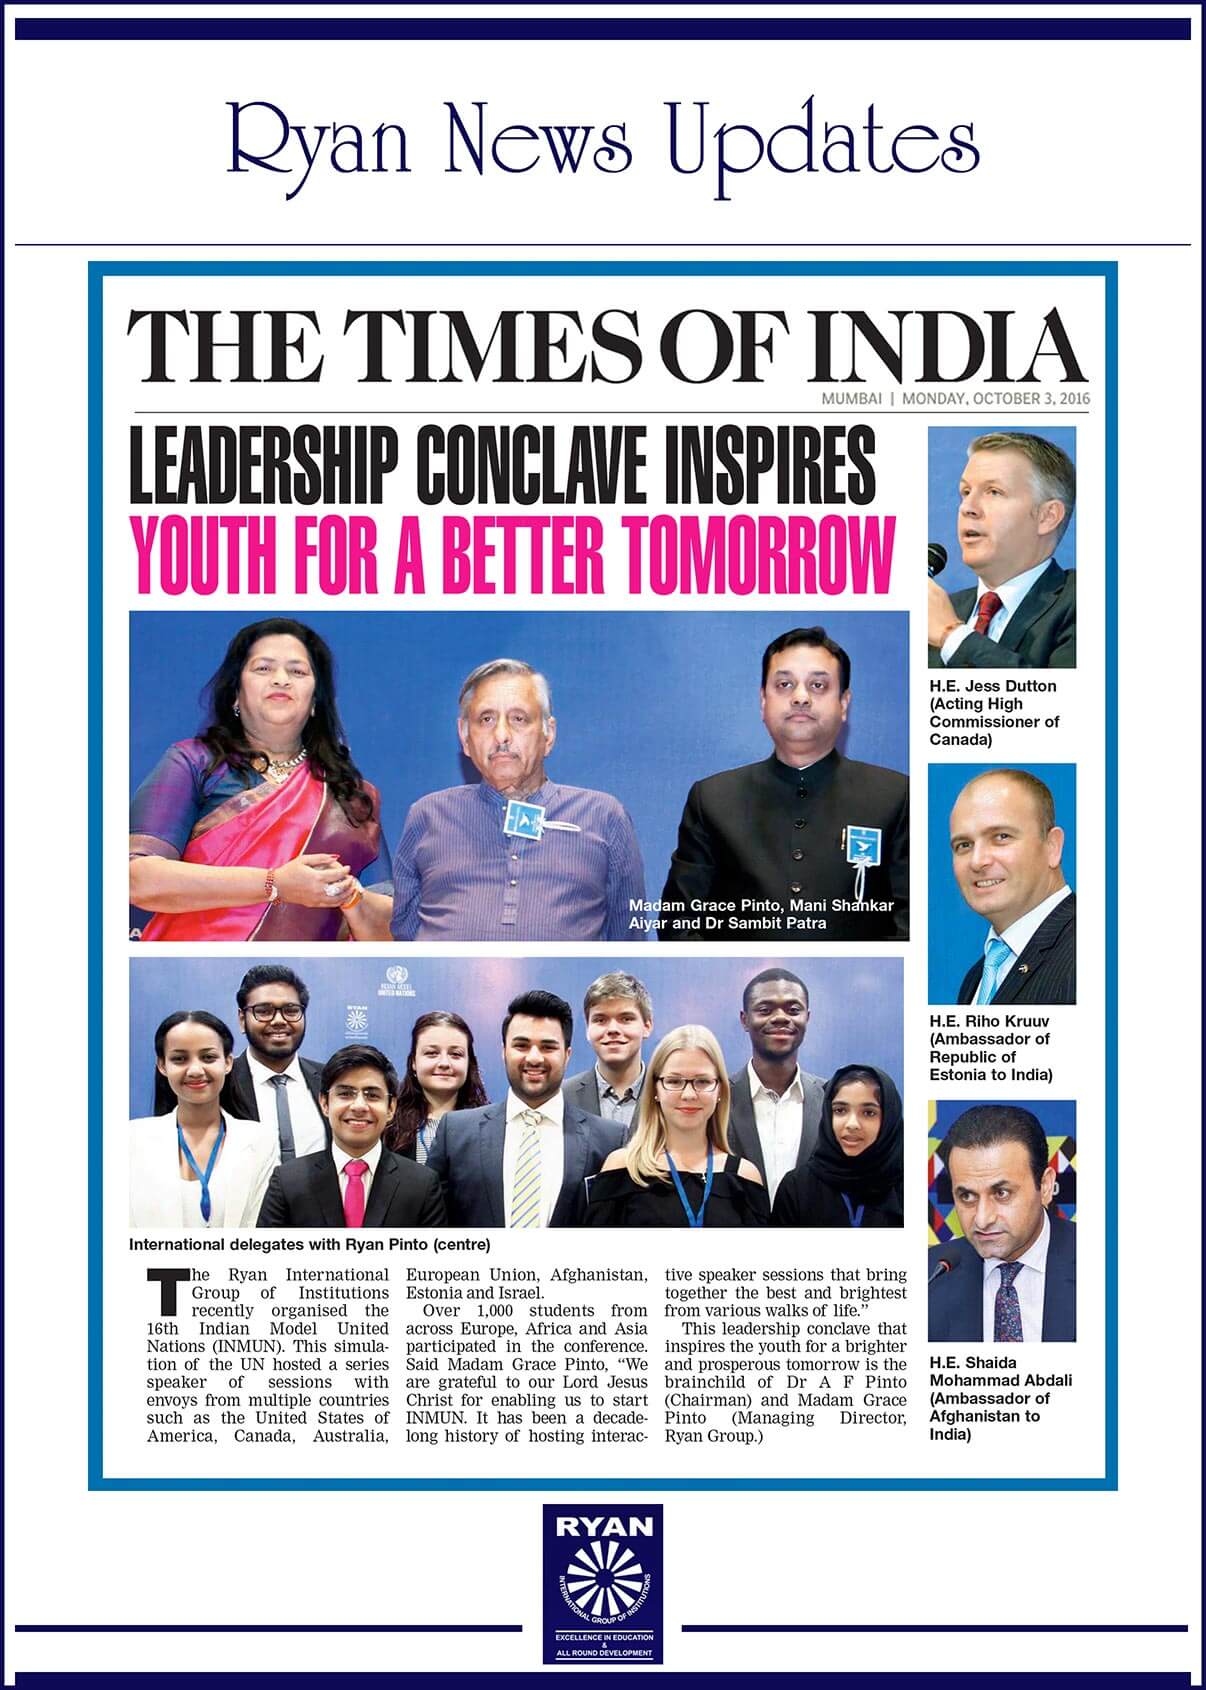 Leadership conclave inspires